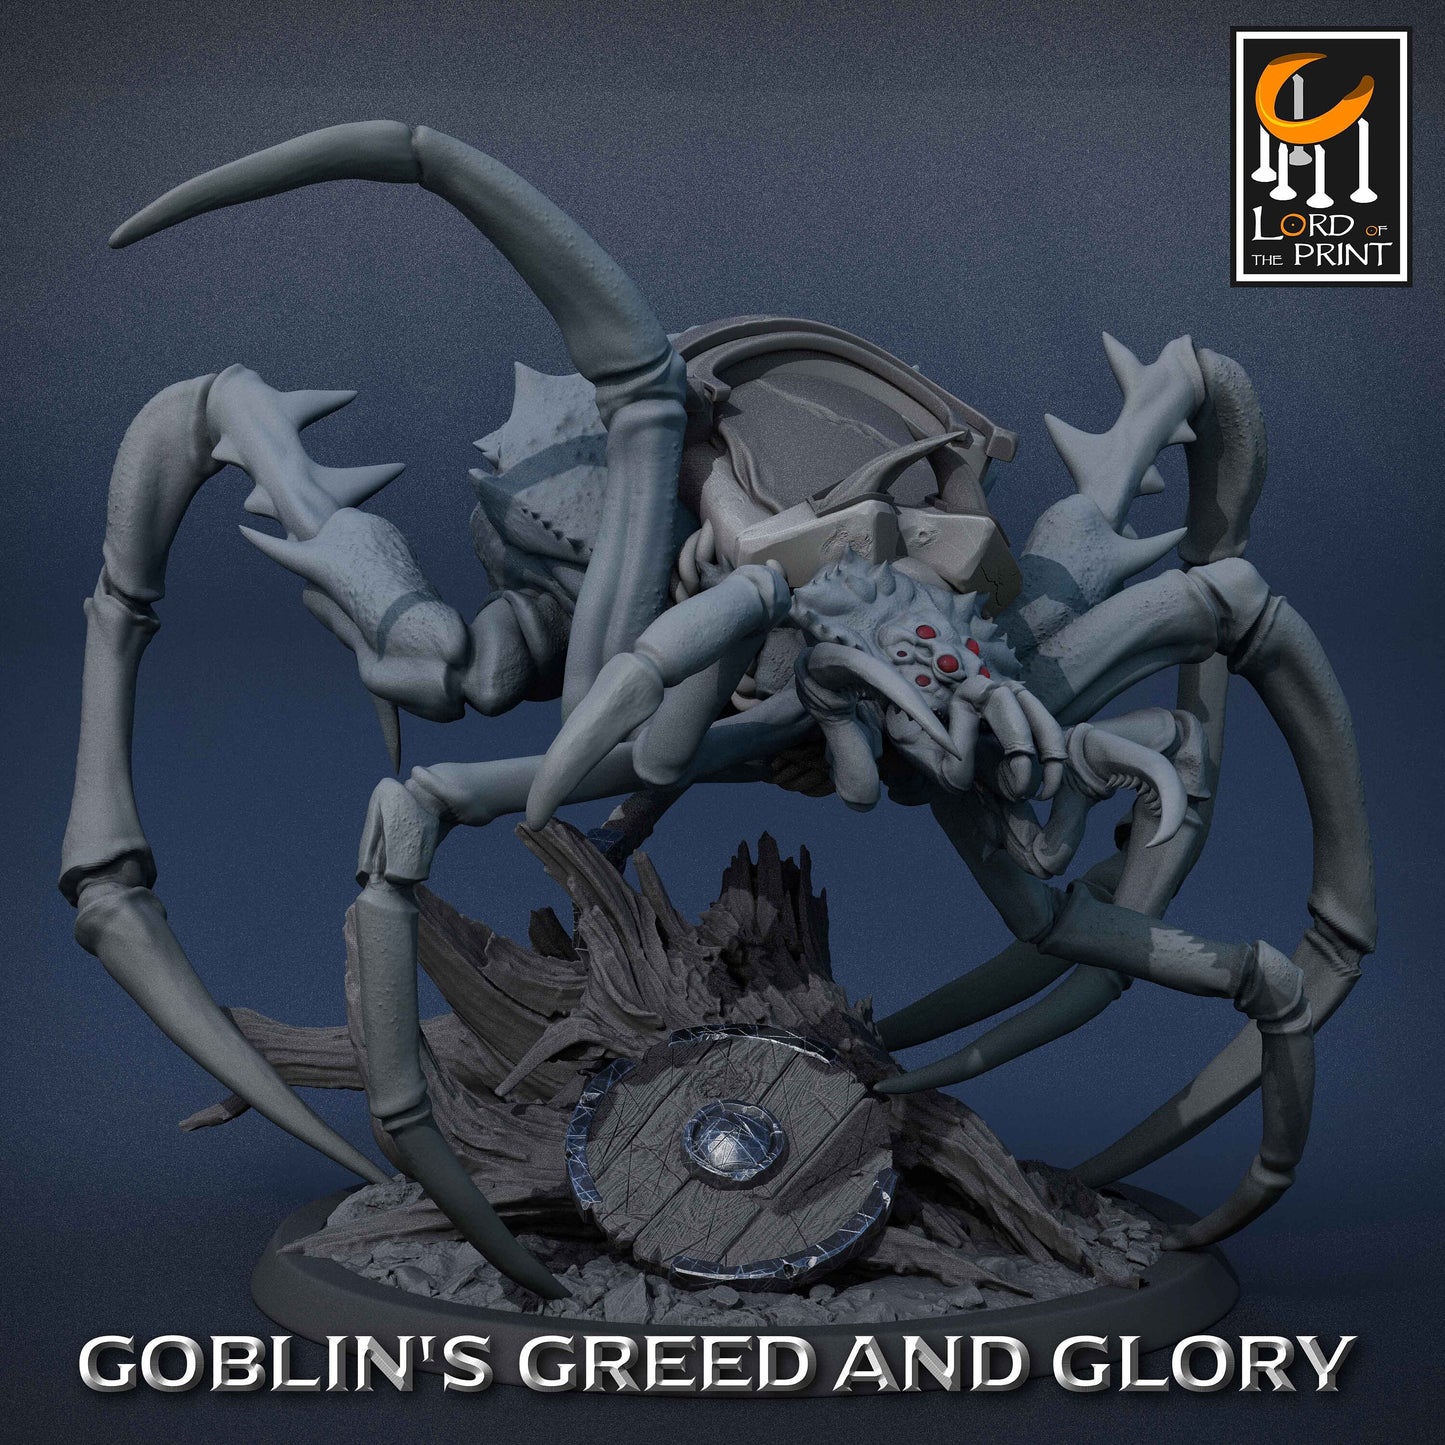 Goblin Spider Mounts (Set 3) by Lord of the Print | Please Read Description